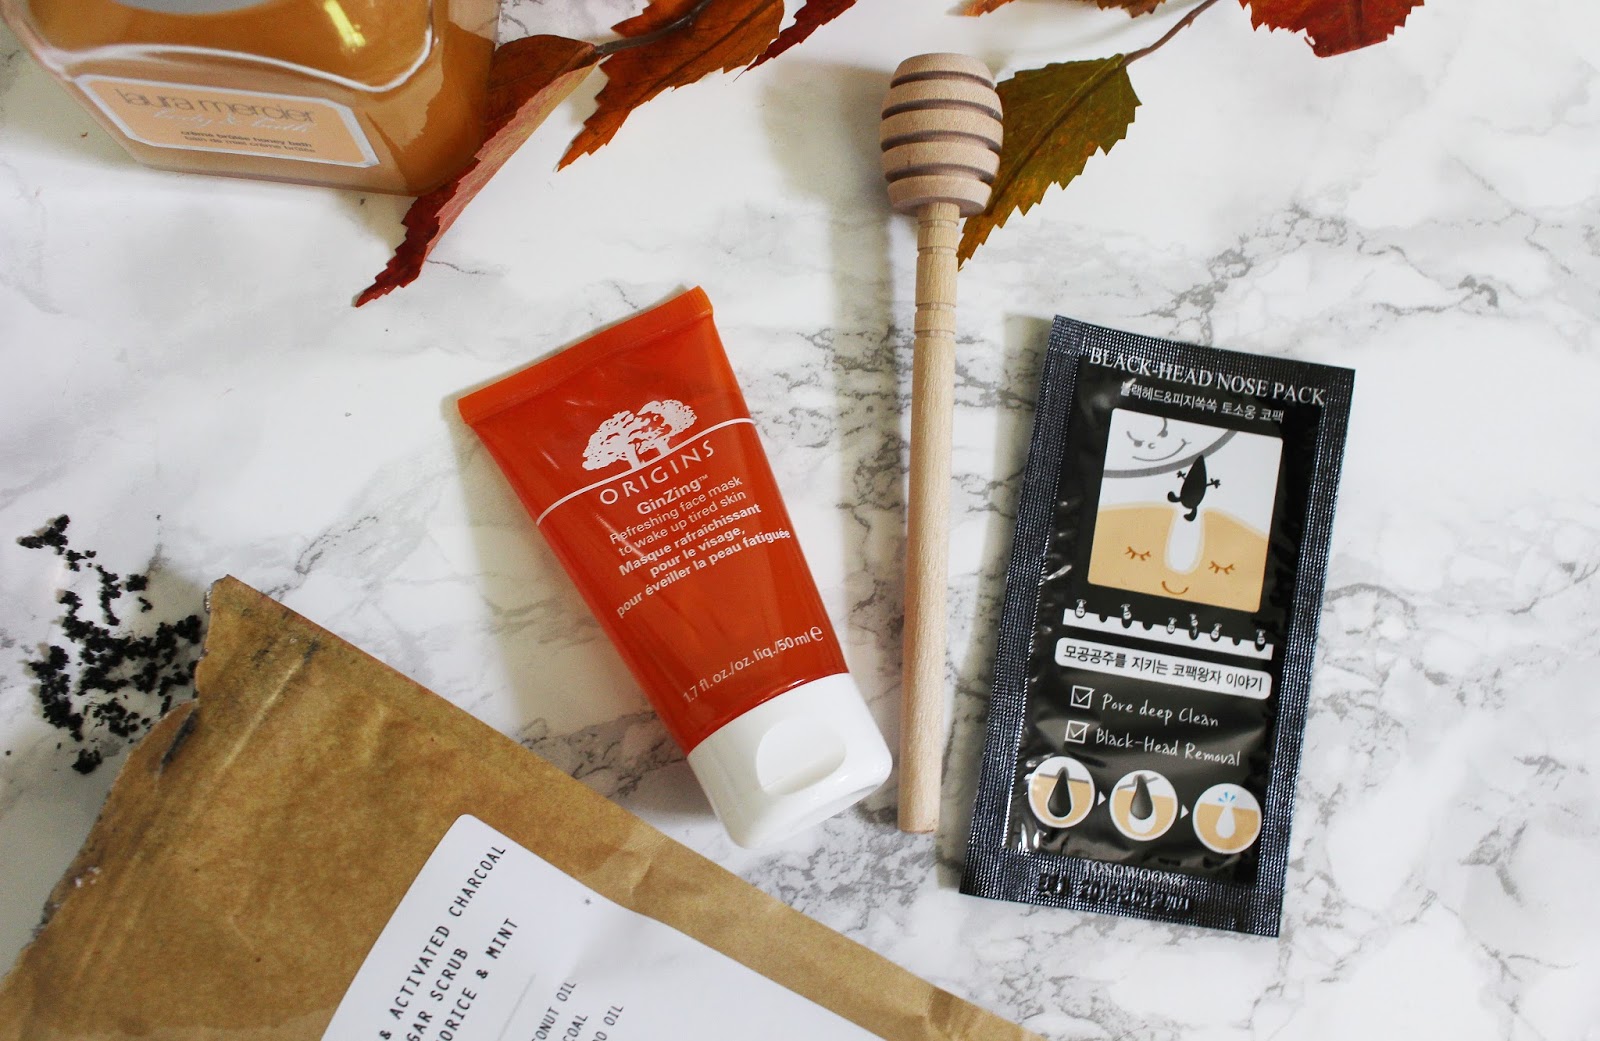 pamper evening, autumn night in, sister and co scrub, fall beauty, autumn beauty, origins ginzing, blackead remover, diptyque roses, laura mercier bath and body creme brûlée,  